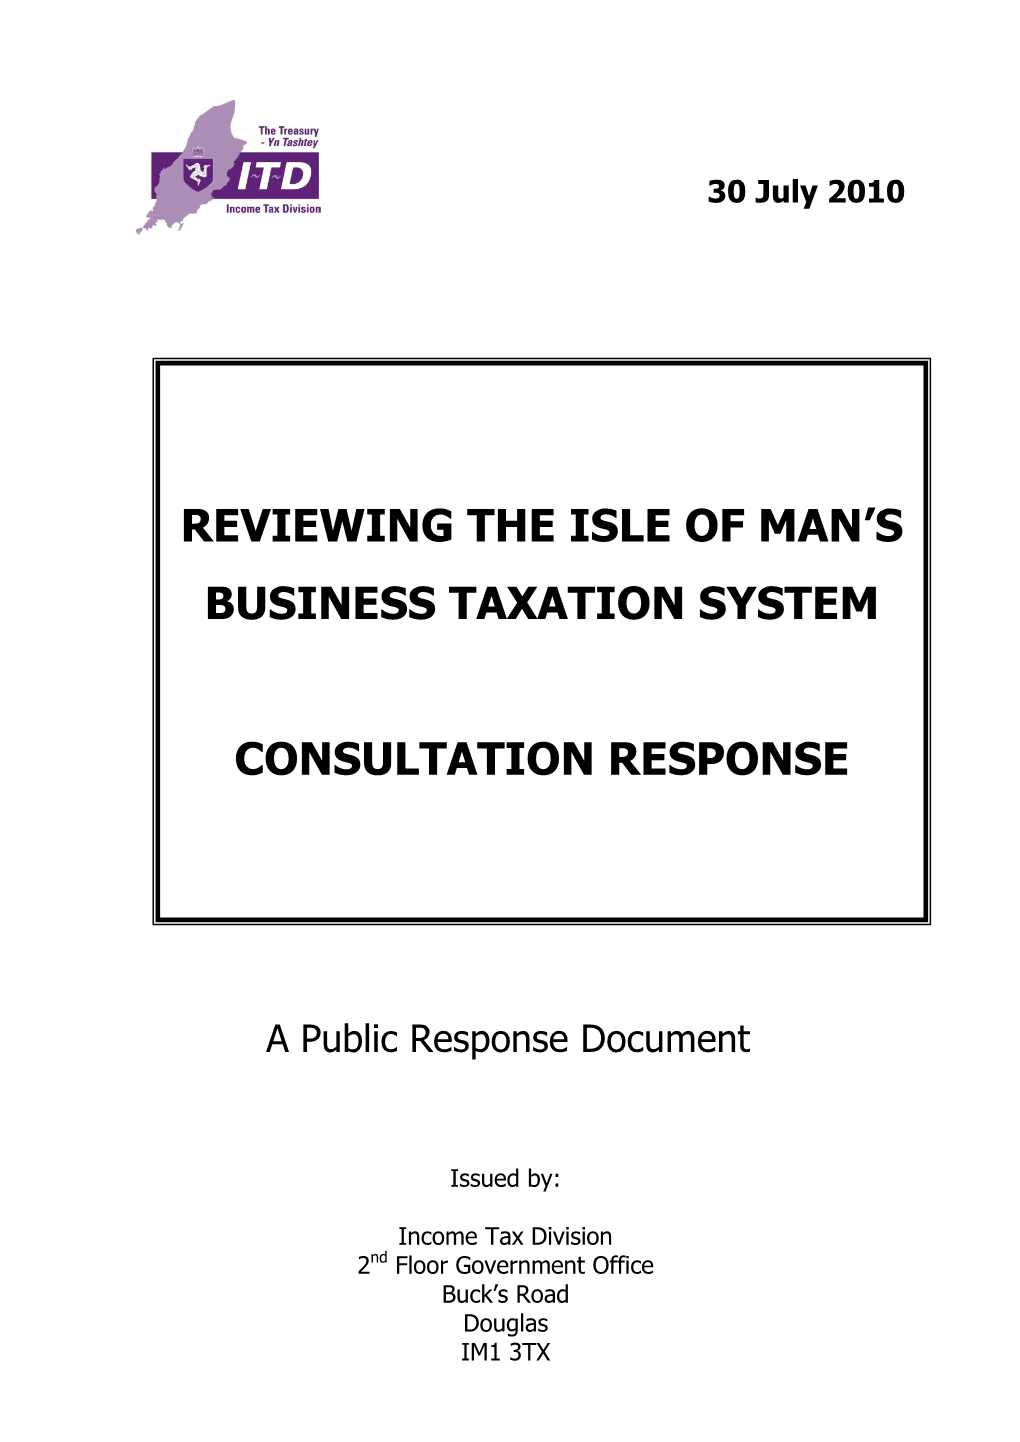 Reviewing the Isle of Man's Business Taxation System Consultation Response